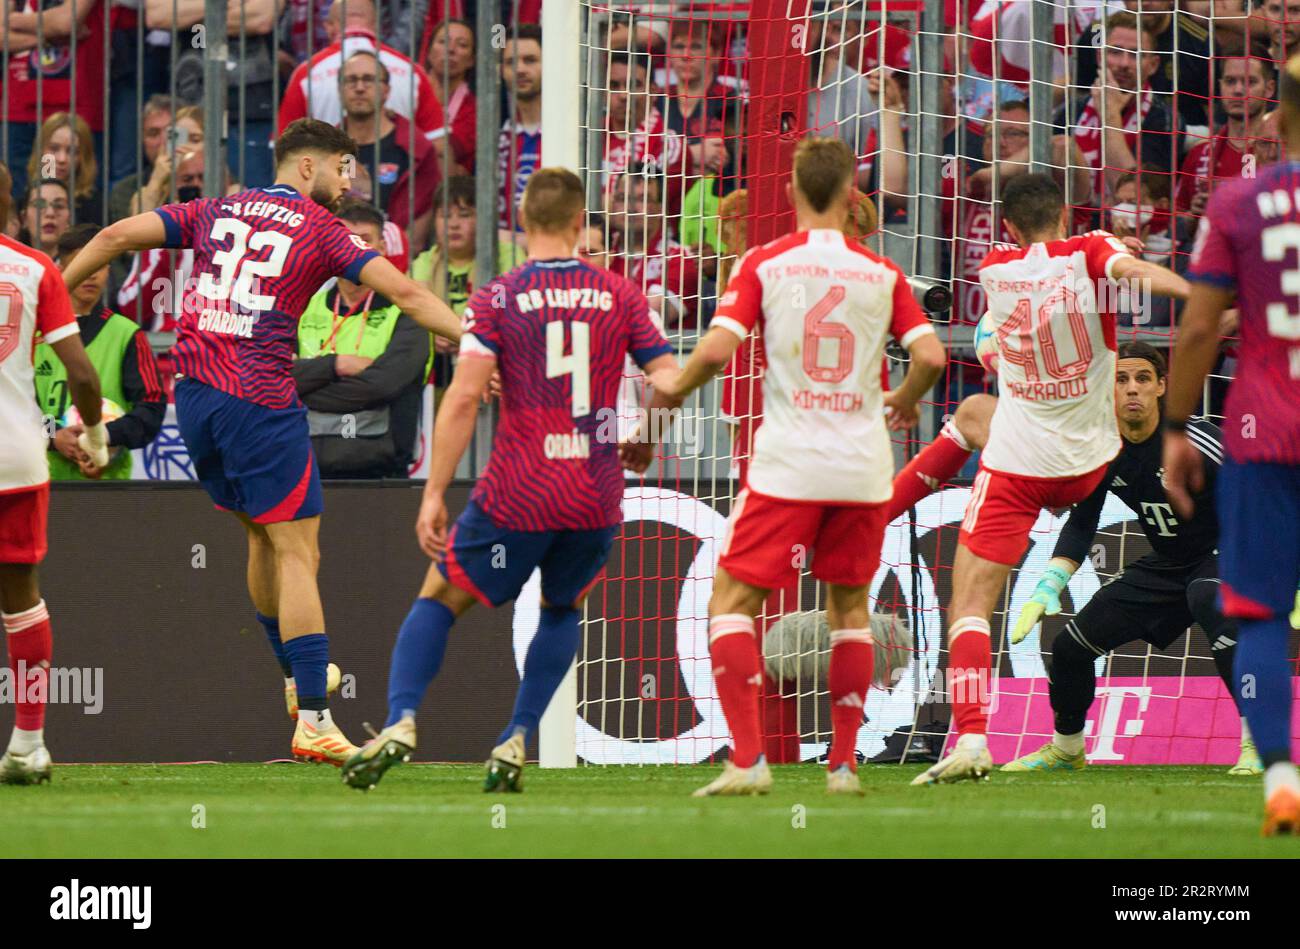 hand play Noussair Mazraoui, FCB 40 for 11m in the match FC BAYERN MUENCHEN - RB LEIPZIG 1.German Football League on May 20, 2023 in Munich, Germany. Season 2022/2023, matchday 33, 1.Bundesliga, FCB, München, 33.Spieltag. © Peter Schatz / Alamy Live News    - DFL REGULATIONS PROHIBIT ANY USE OF PHOTOGRAPHS as IMAGE SEQUENCES and/or QUASI-VIDEO - Stock Photo